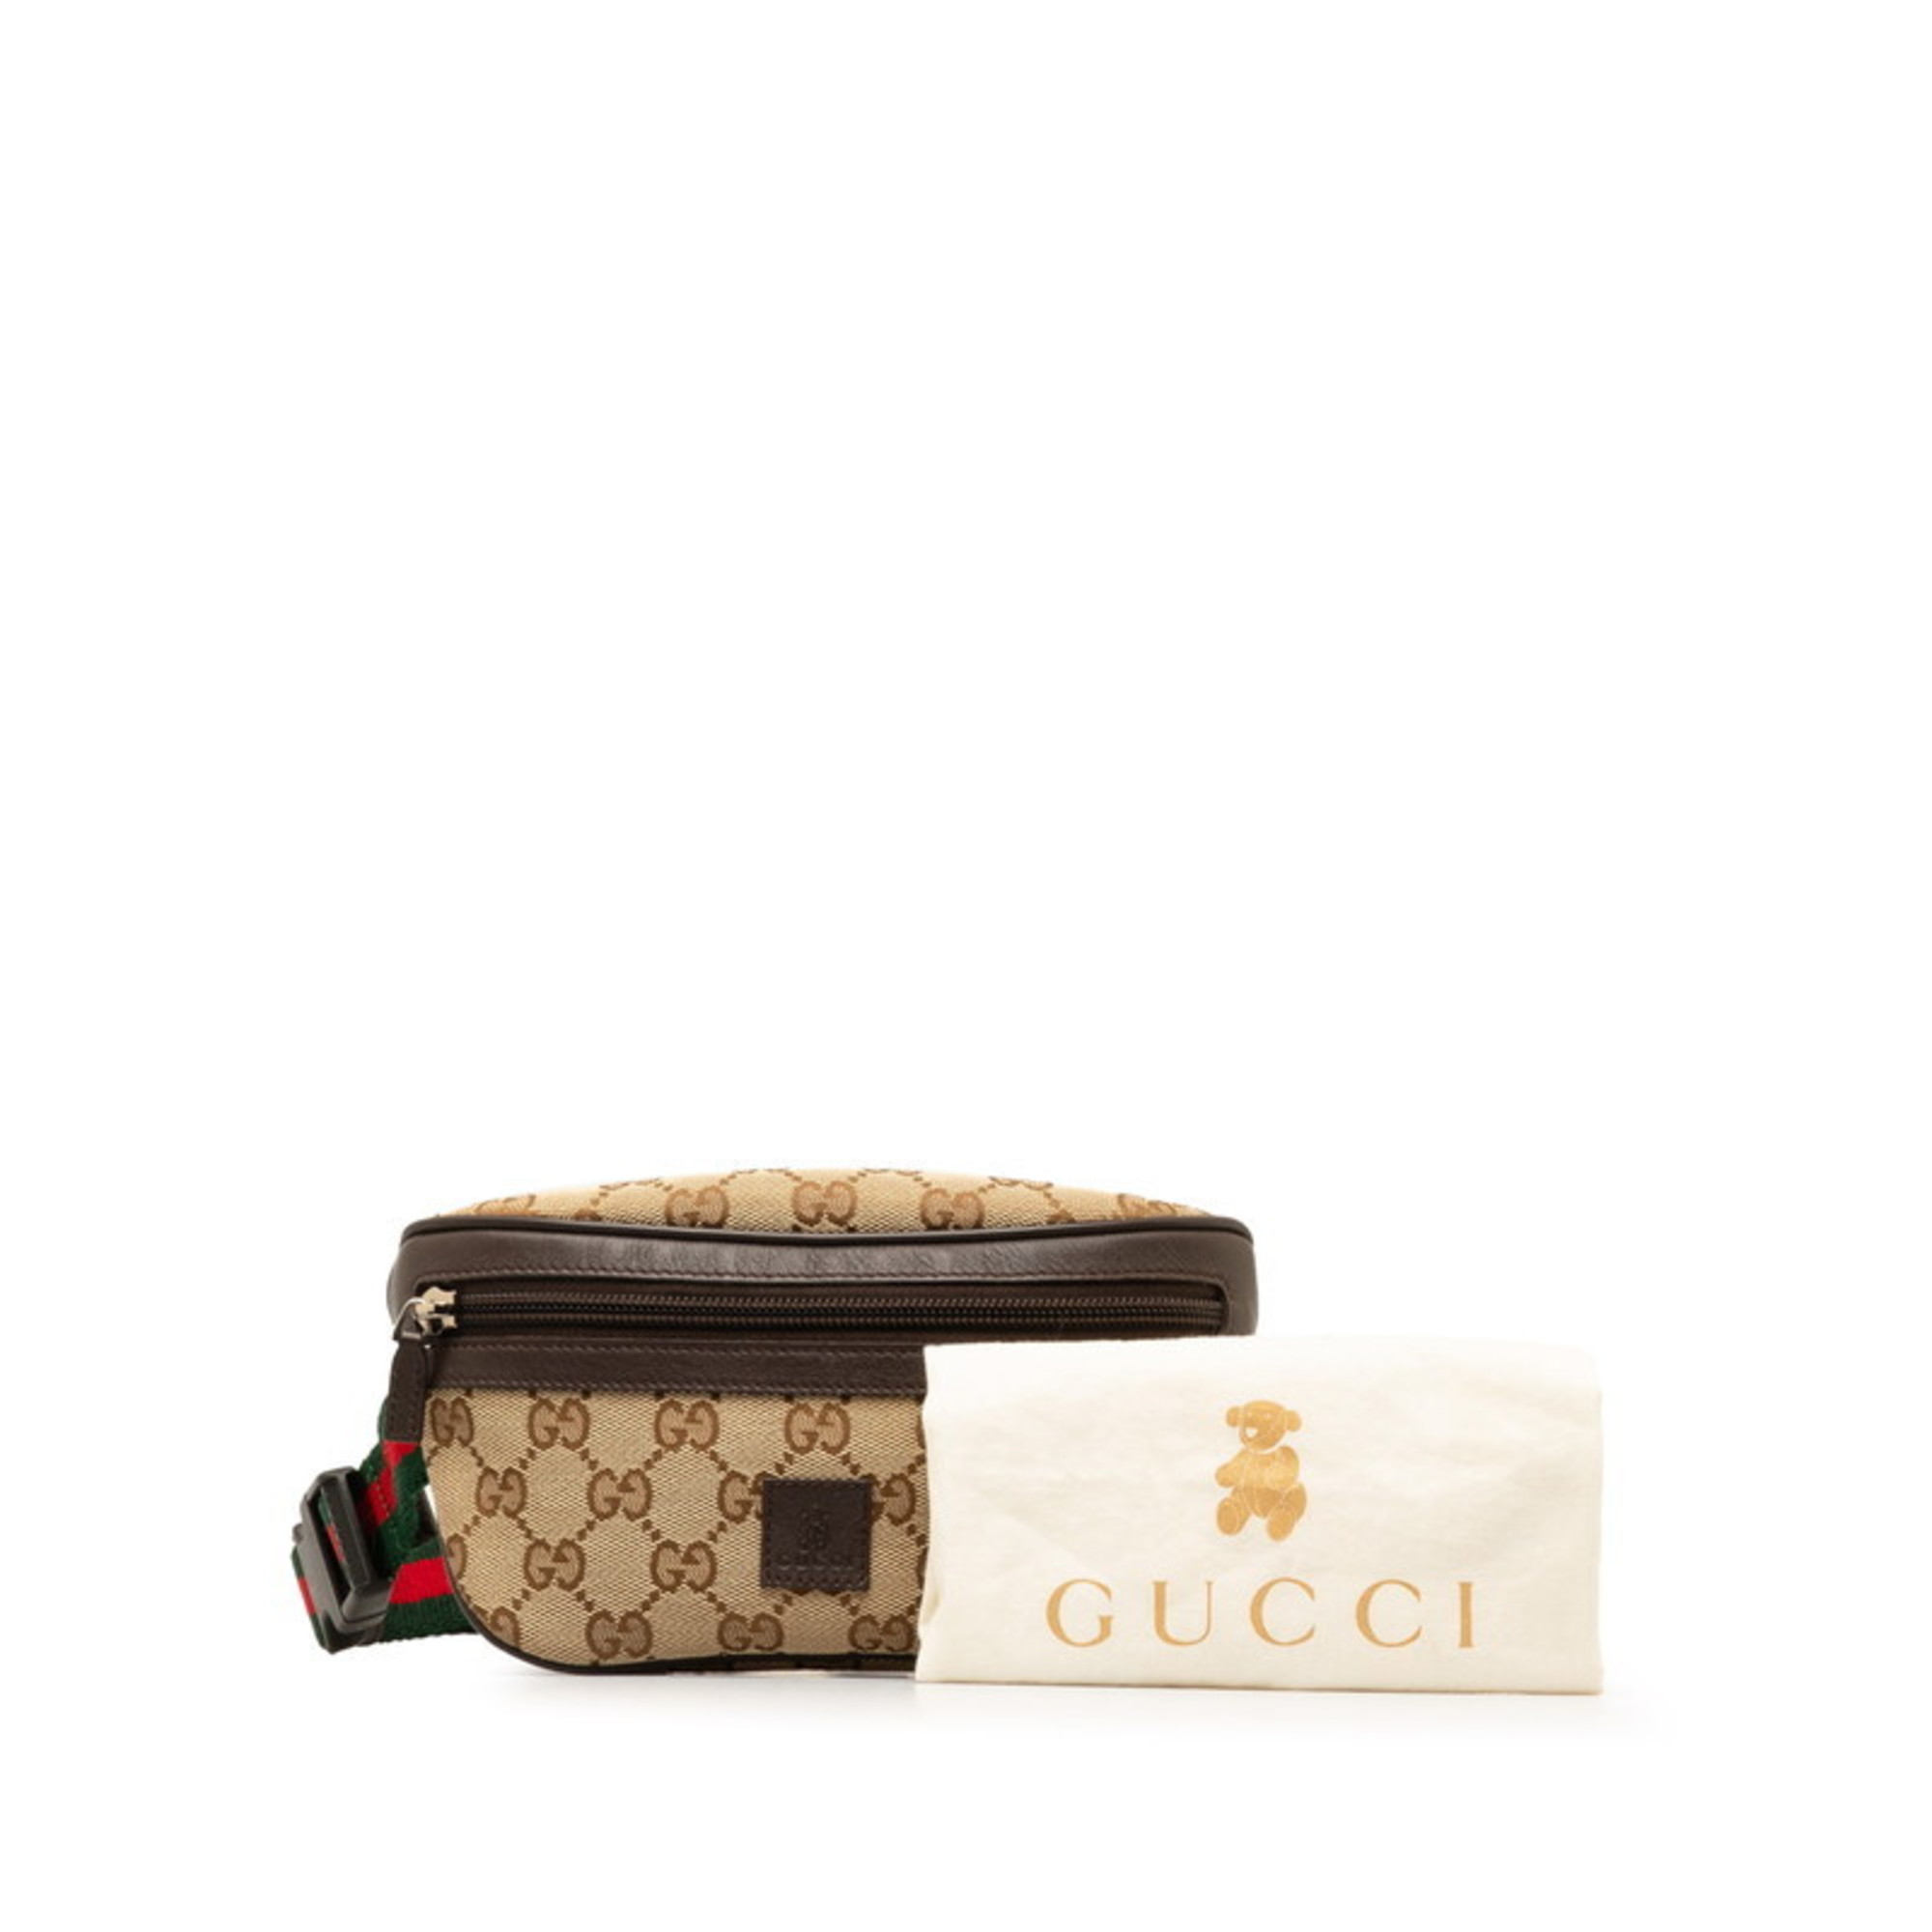 Gucci GG Canvas Sherry Line Waist Bag Body 311159 Beige Multicolor Leather Women's GUCCI